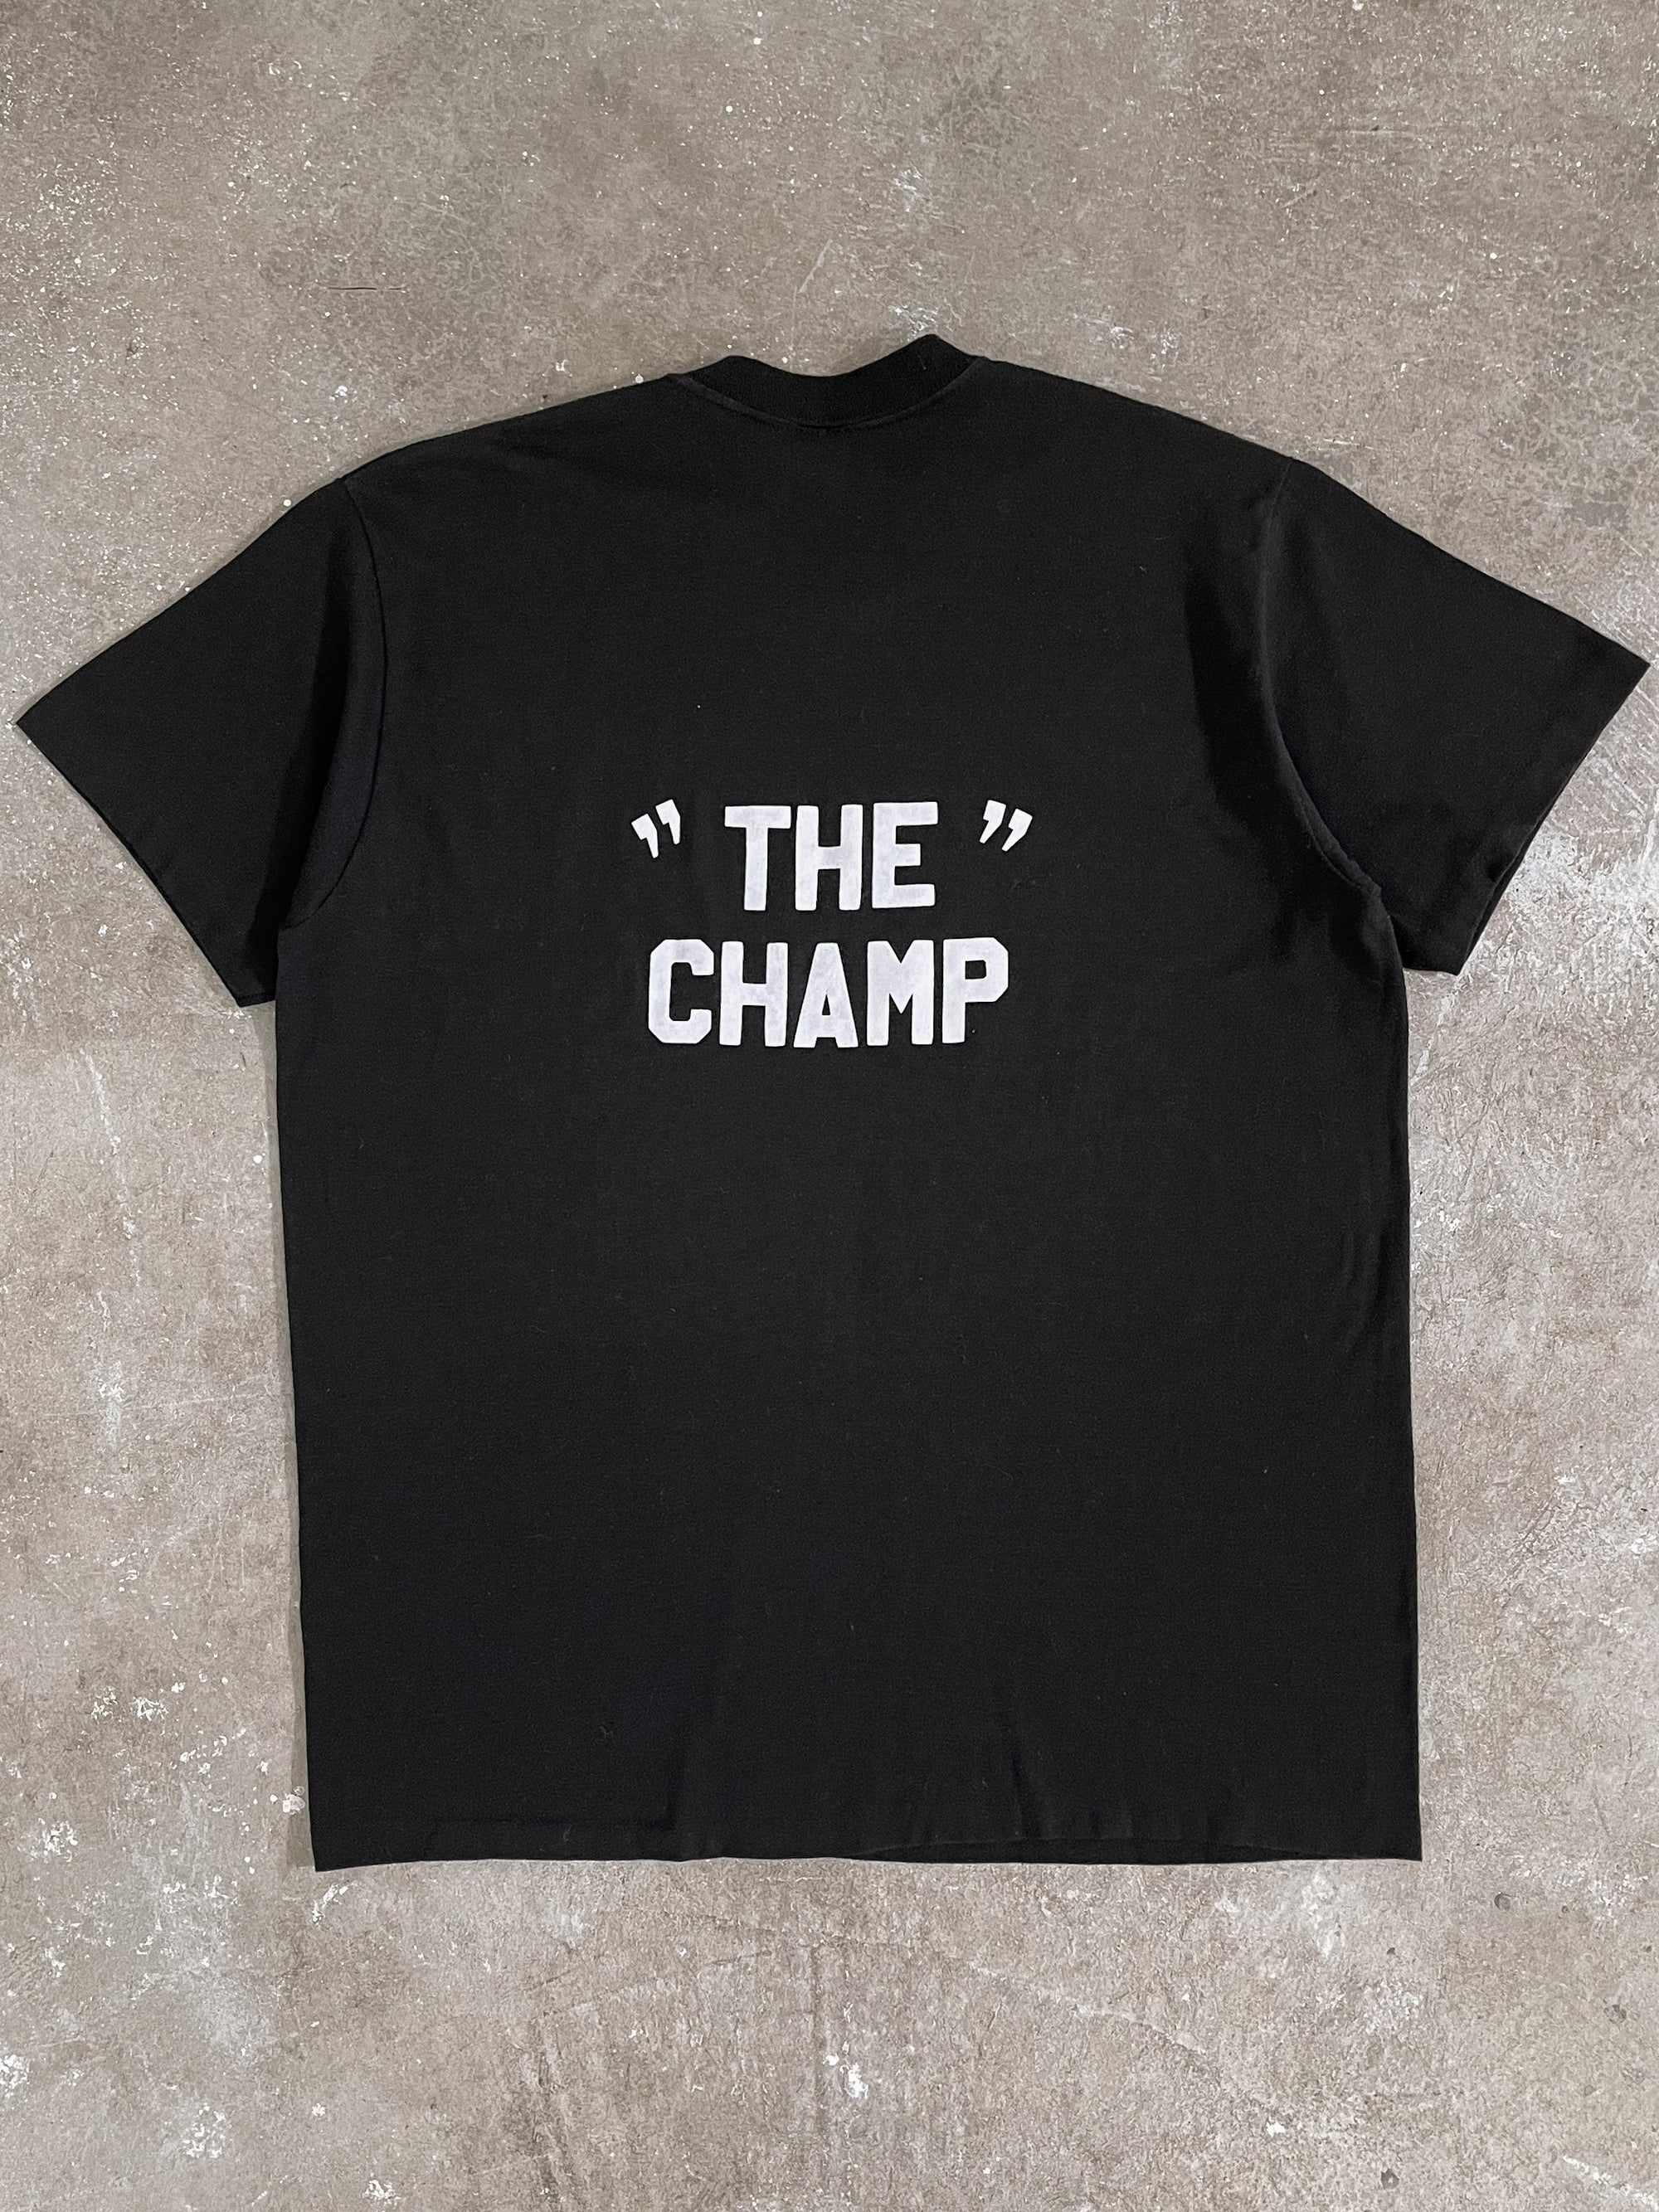 1980s “The Champ” Single Stitched Tee (L)